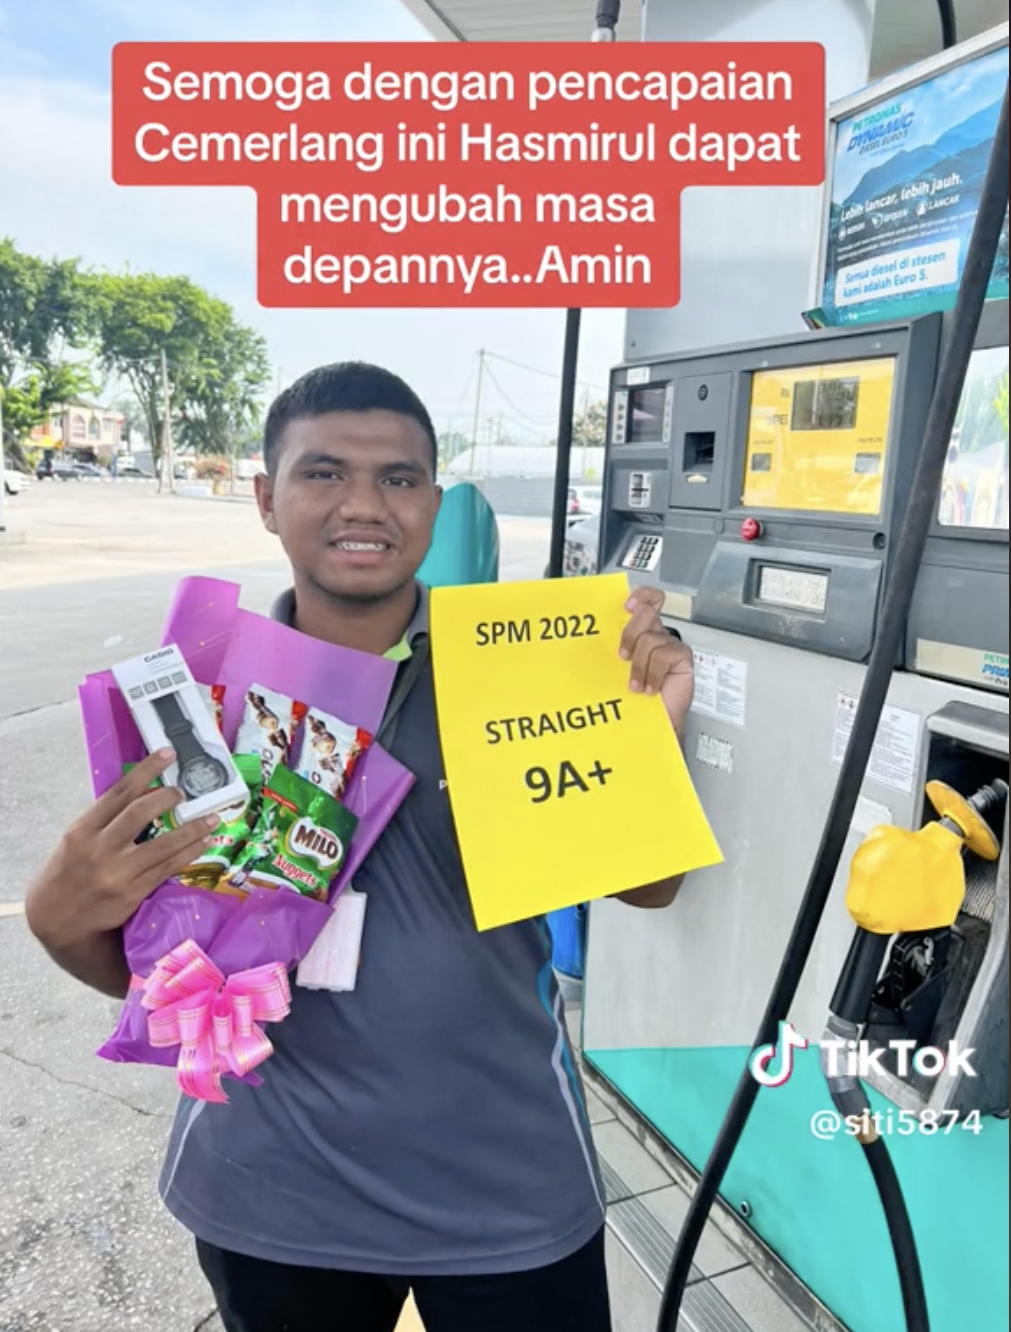 Hasmirul, the petrol station worker who scored 9as smiling with his gifts